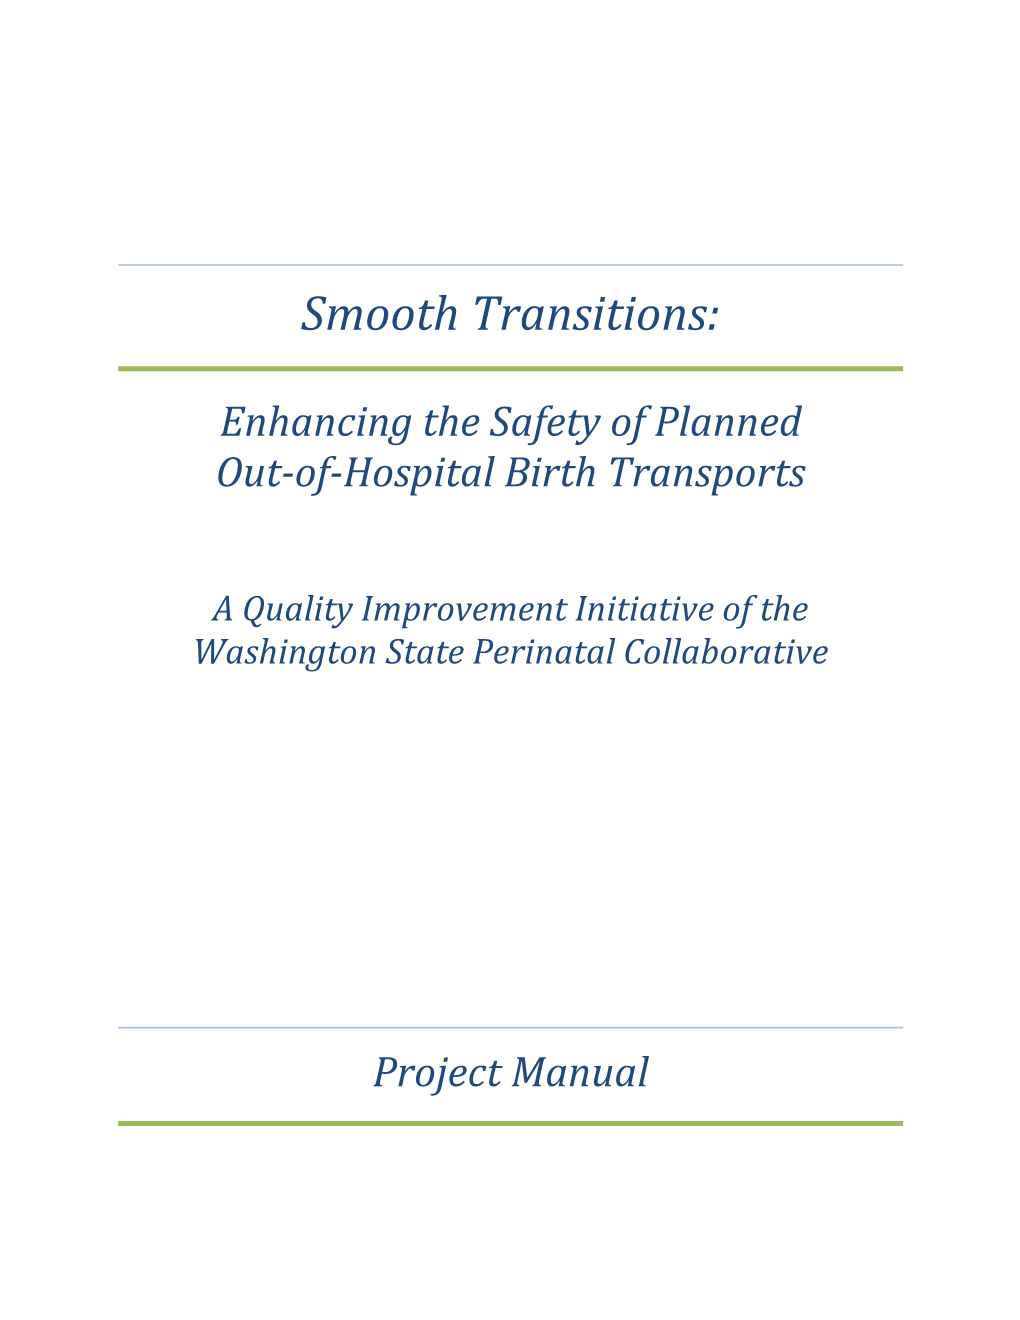 Planned Out-Of-Hospital Birth Transfer Quality Improvement Project Manual